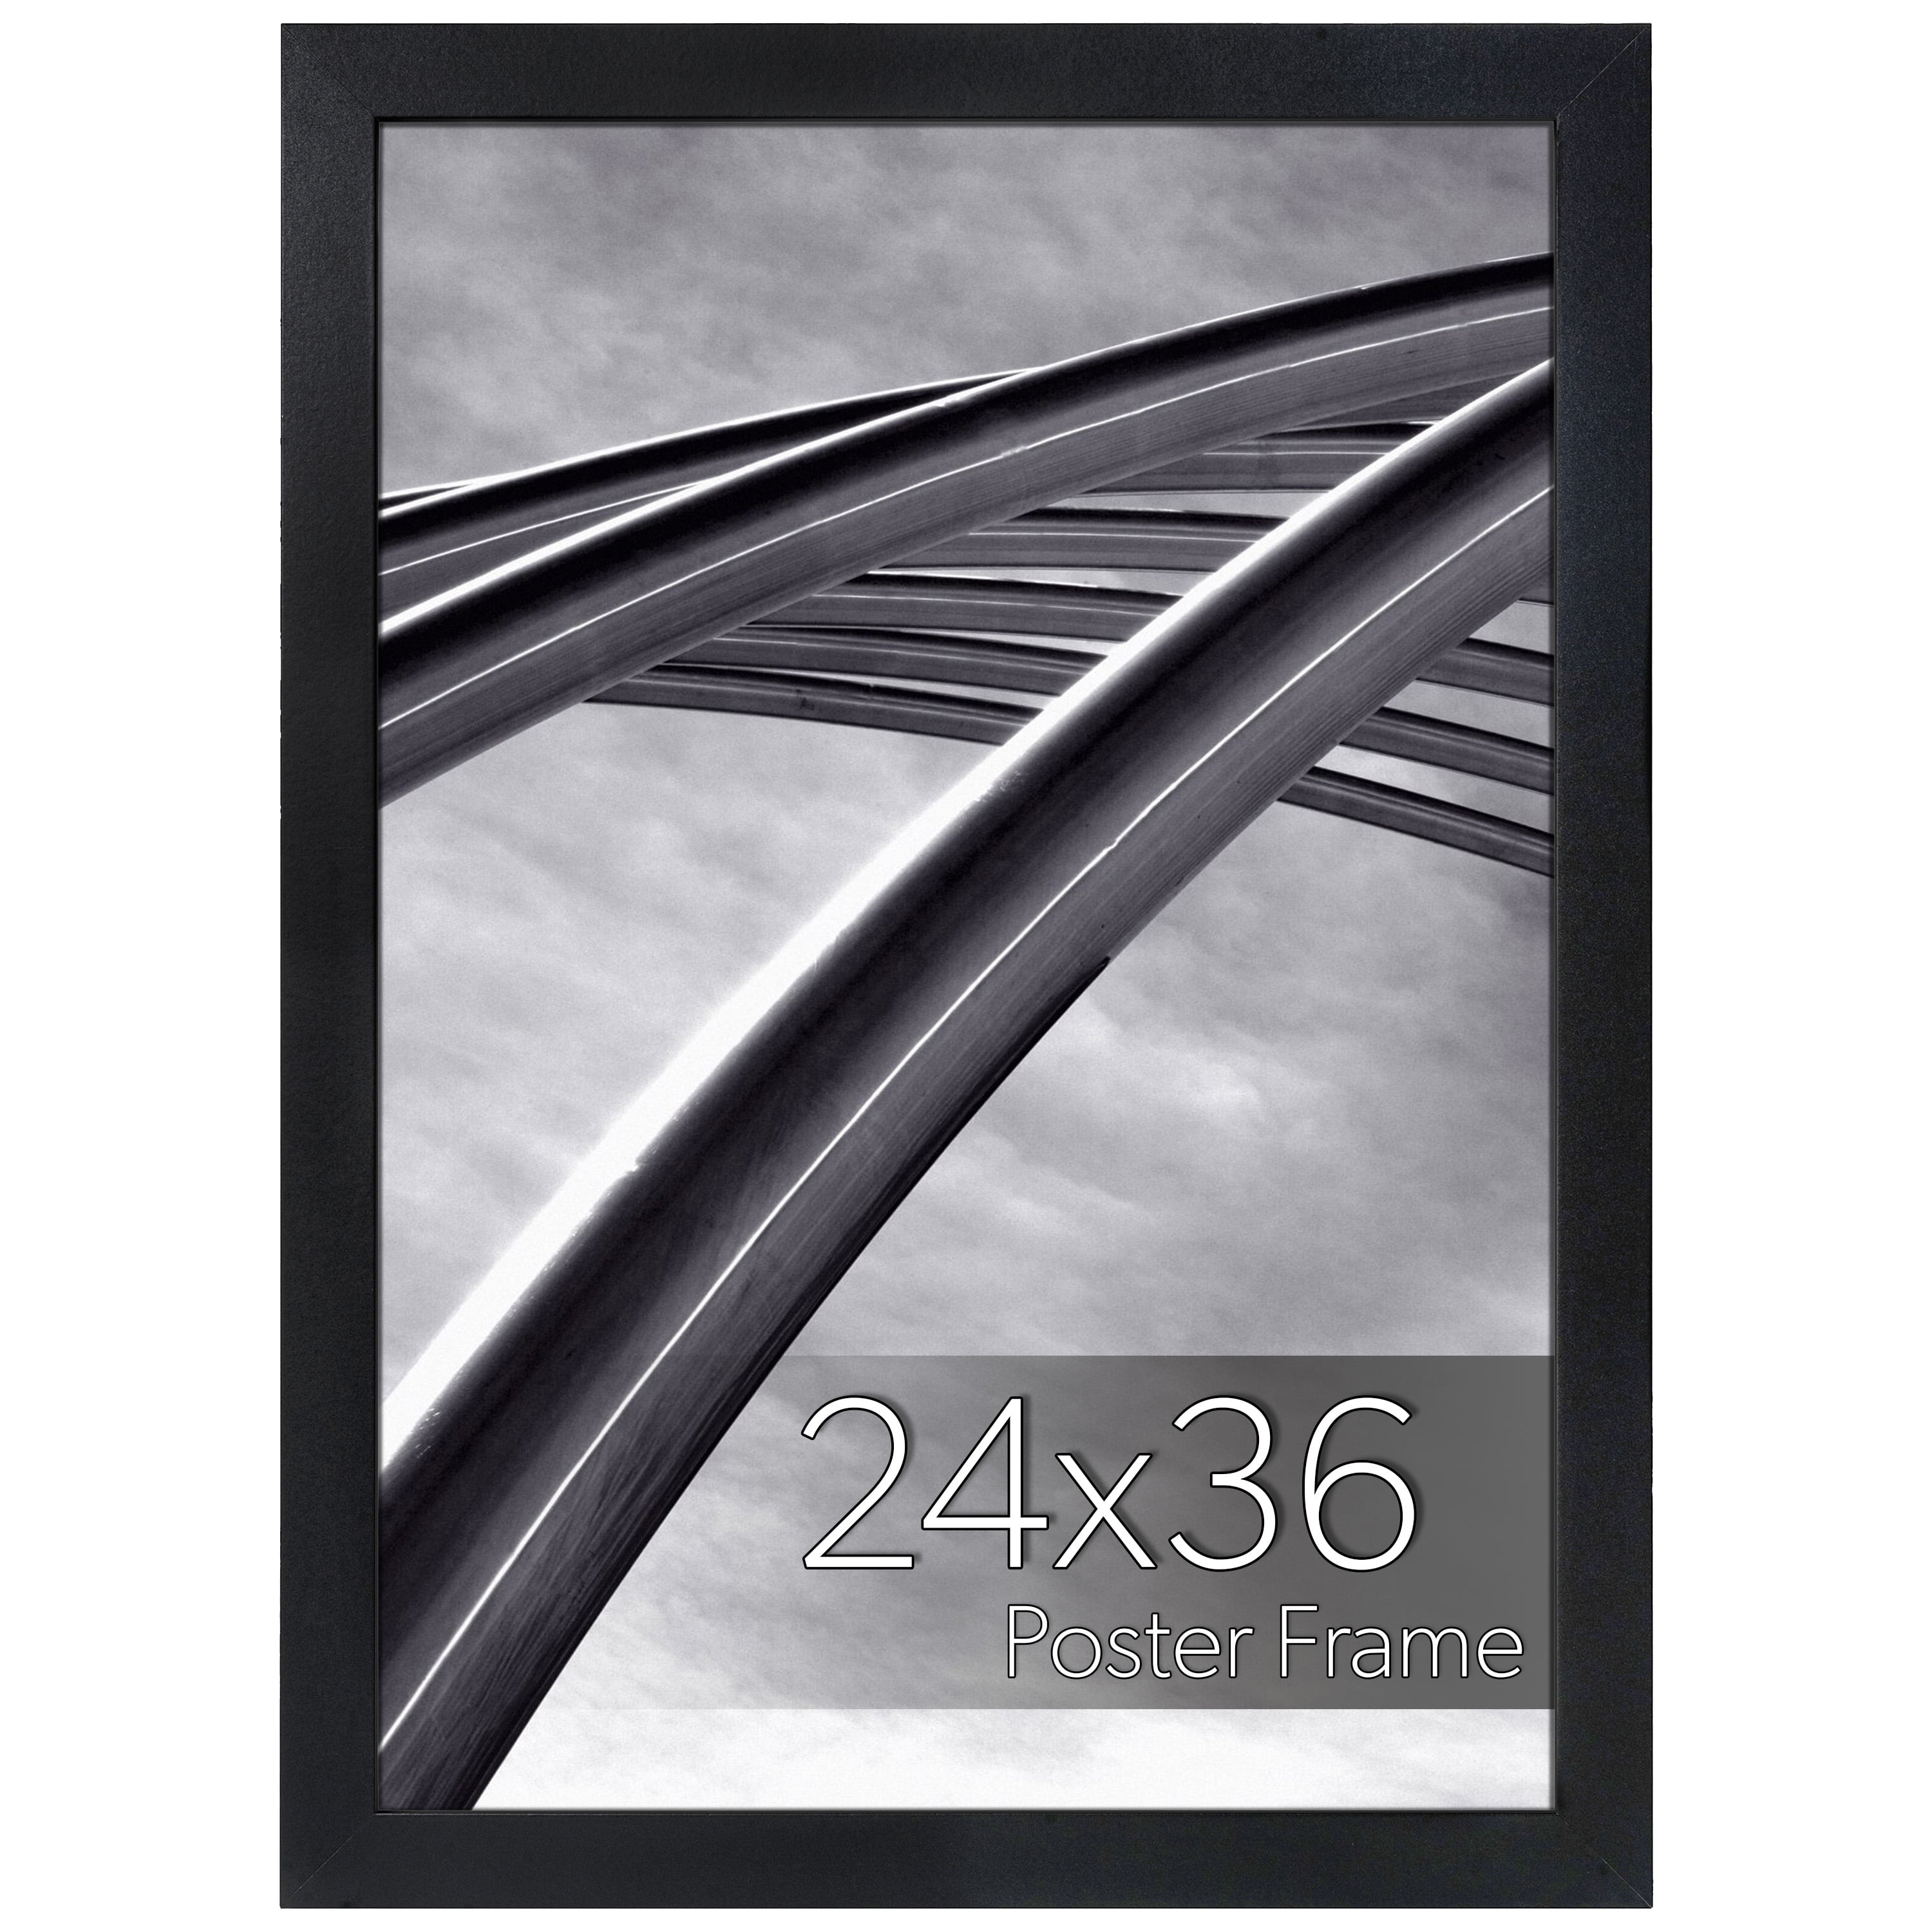 (1) 24x30 - Picture Frame for Puzzles, Photos, Artwork - 1.25 inch Black MDF Frame with Plexi-Glass and Hanging Hardware, Size: 24 x 30